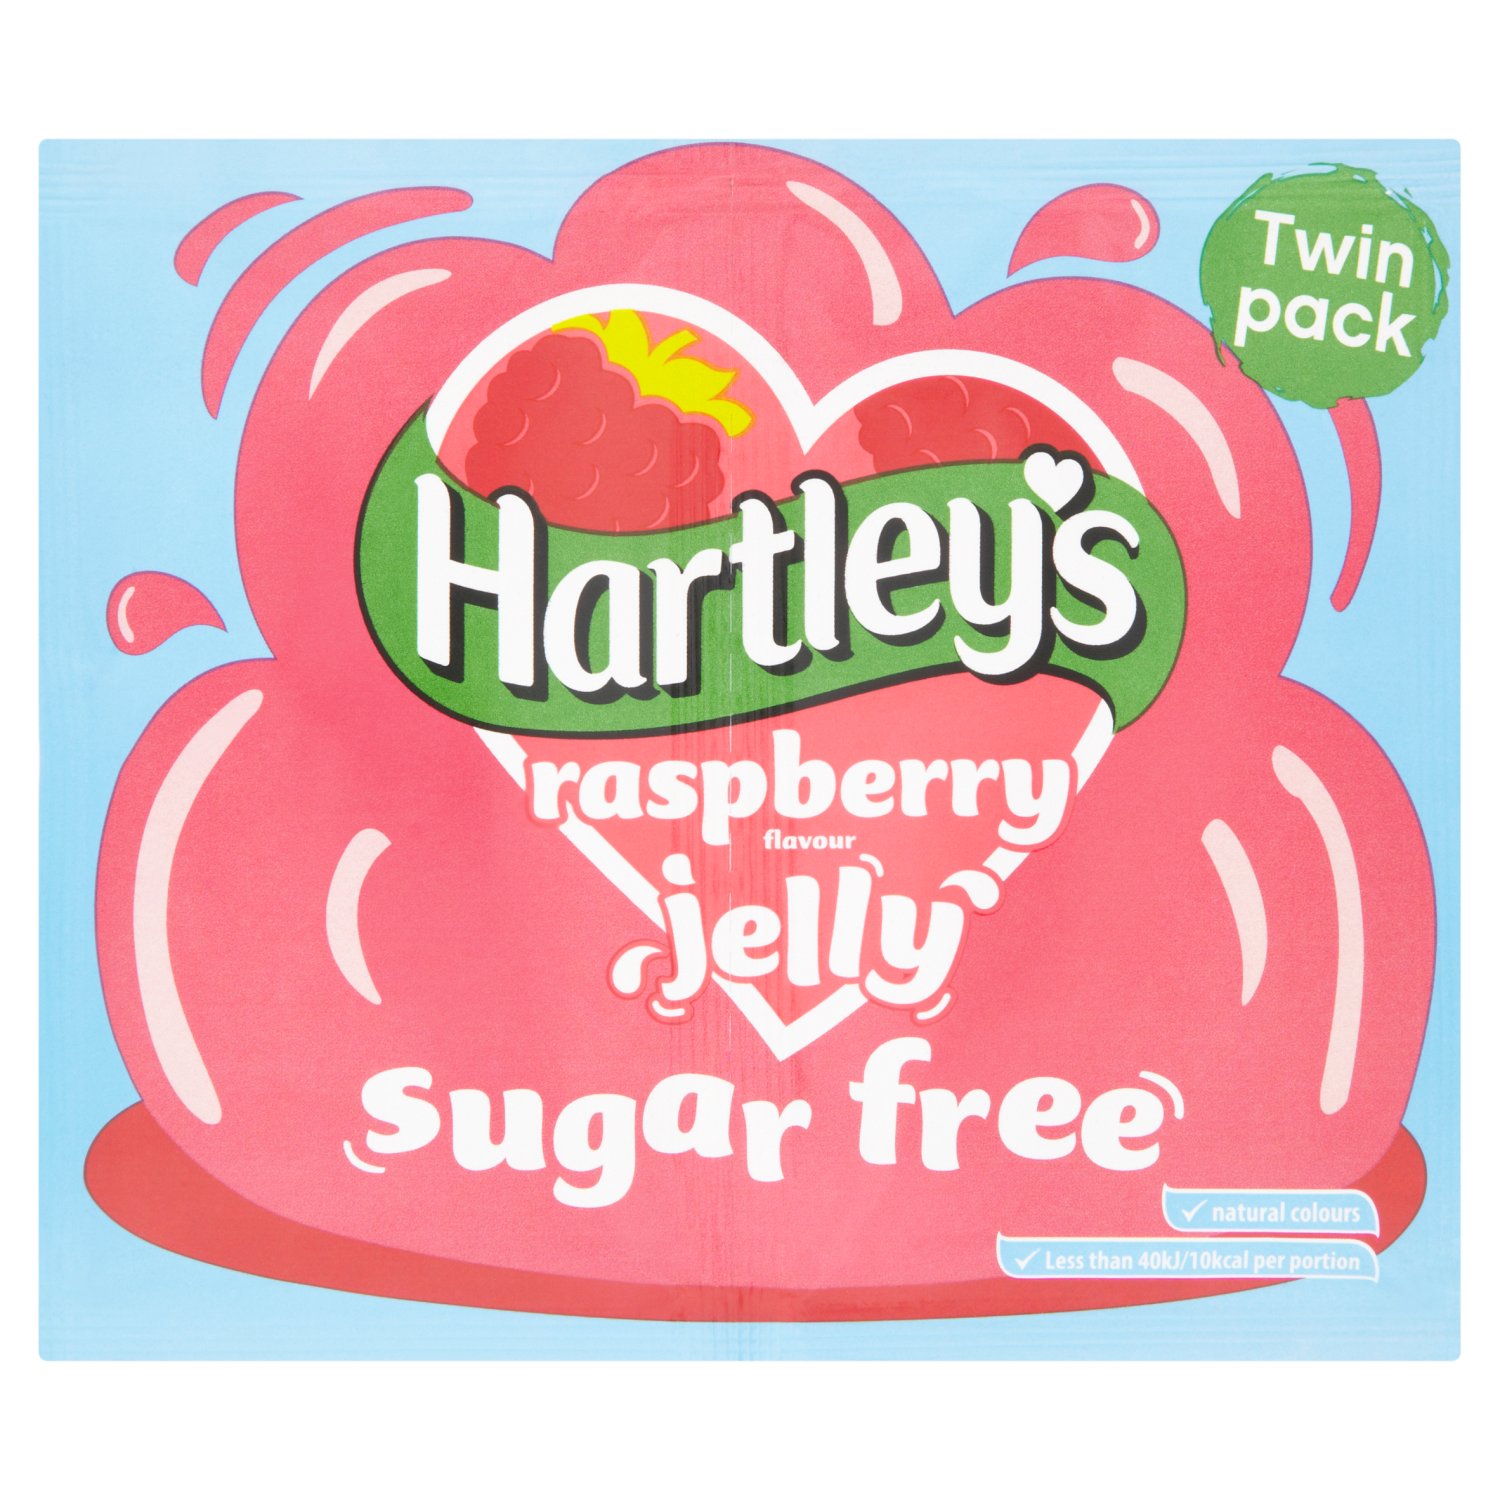 Hartley's Raspberry Jelly Sugar Free Twin Pack (23 g)